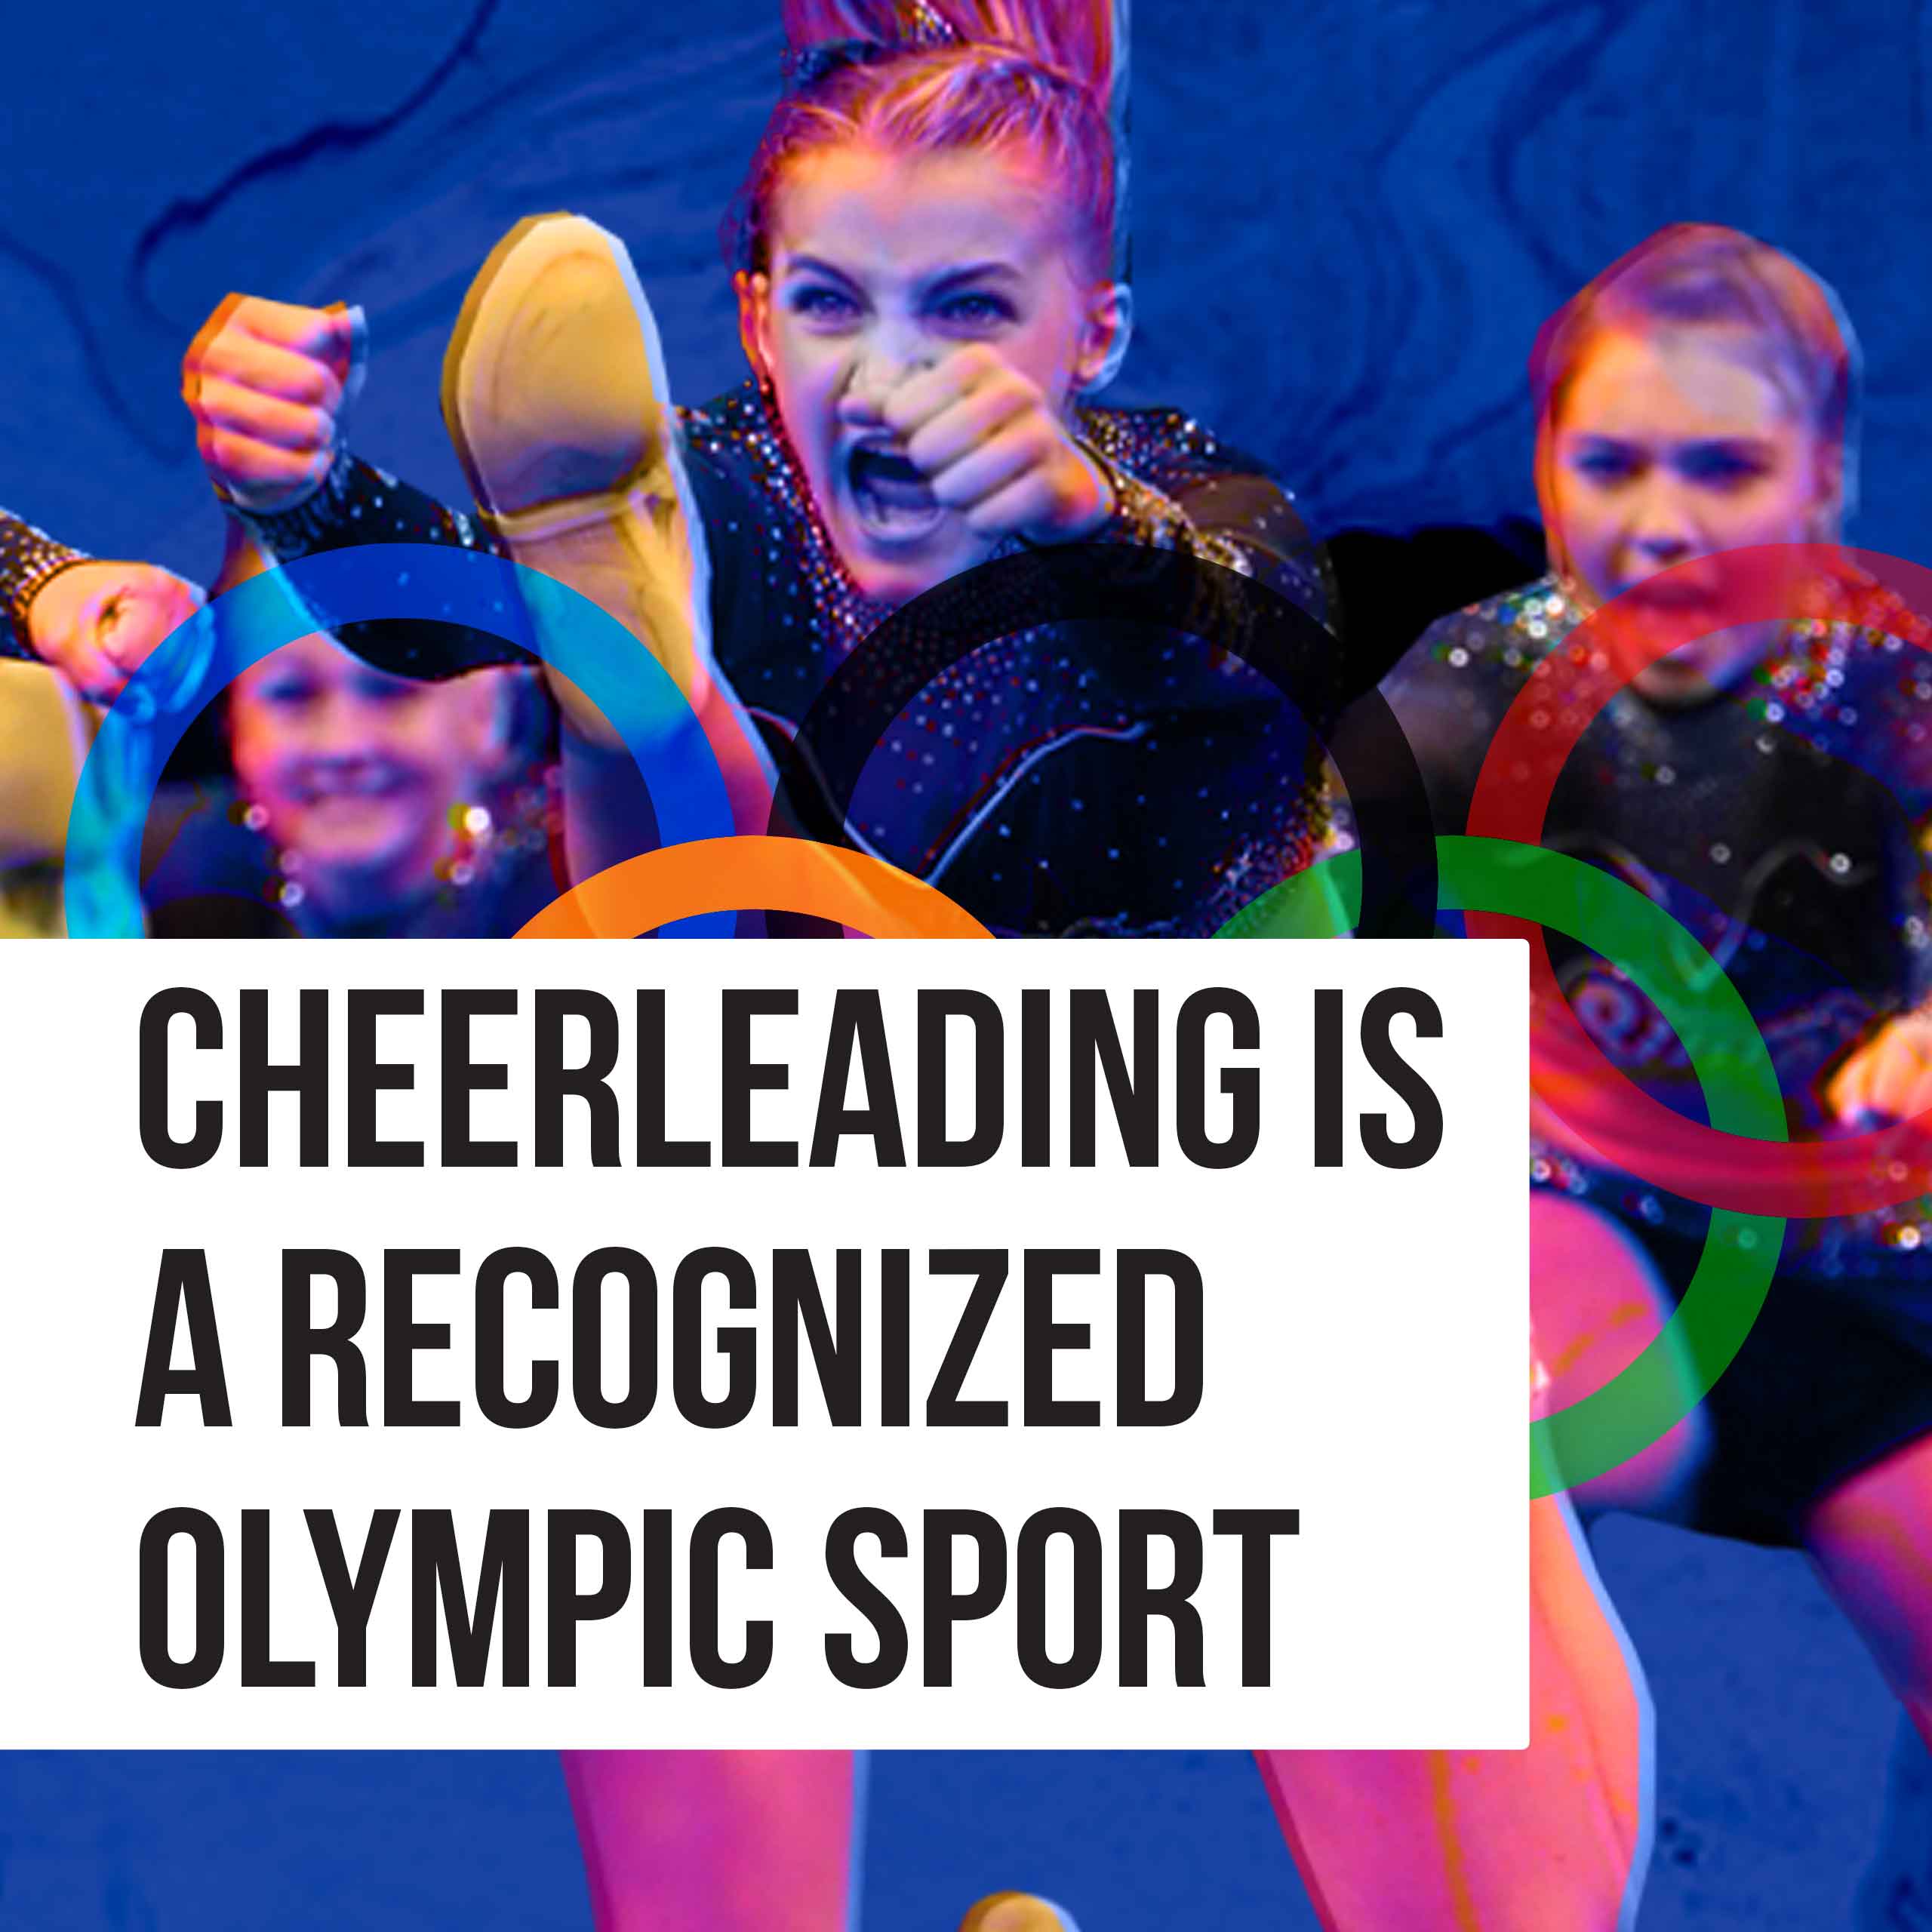 Cheerleading is a recognized Olympic sport